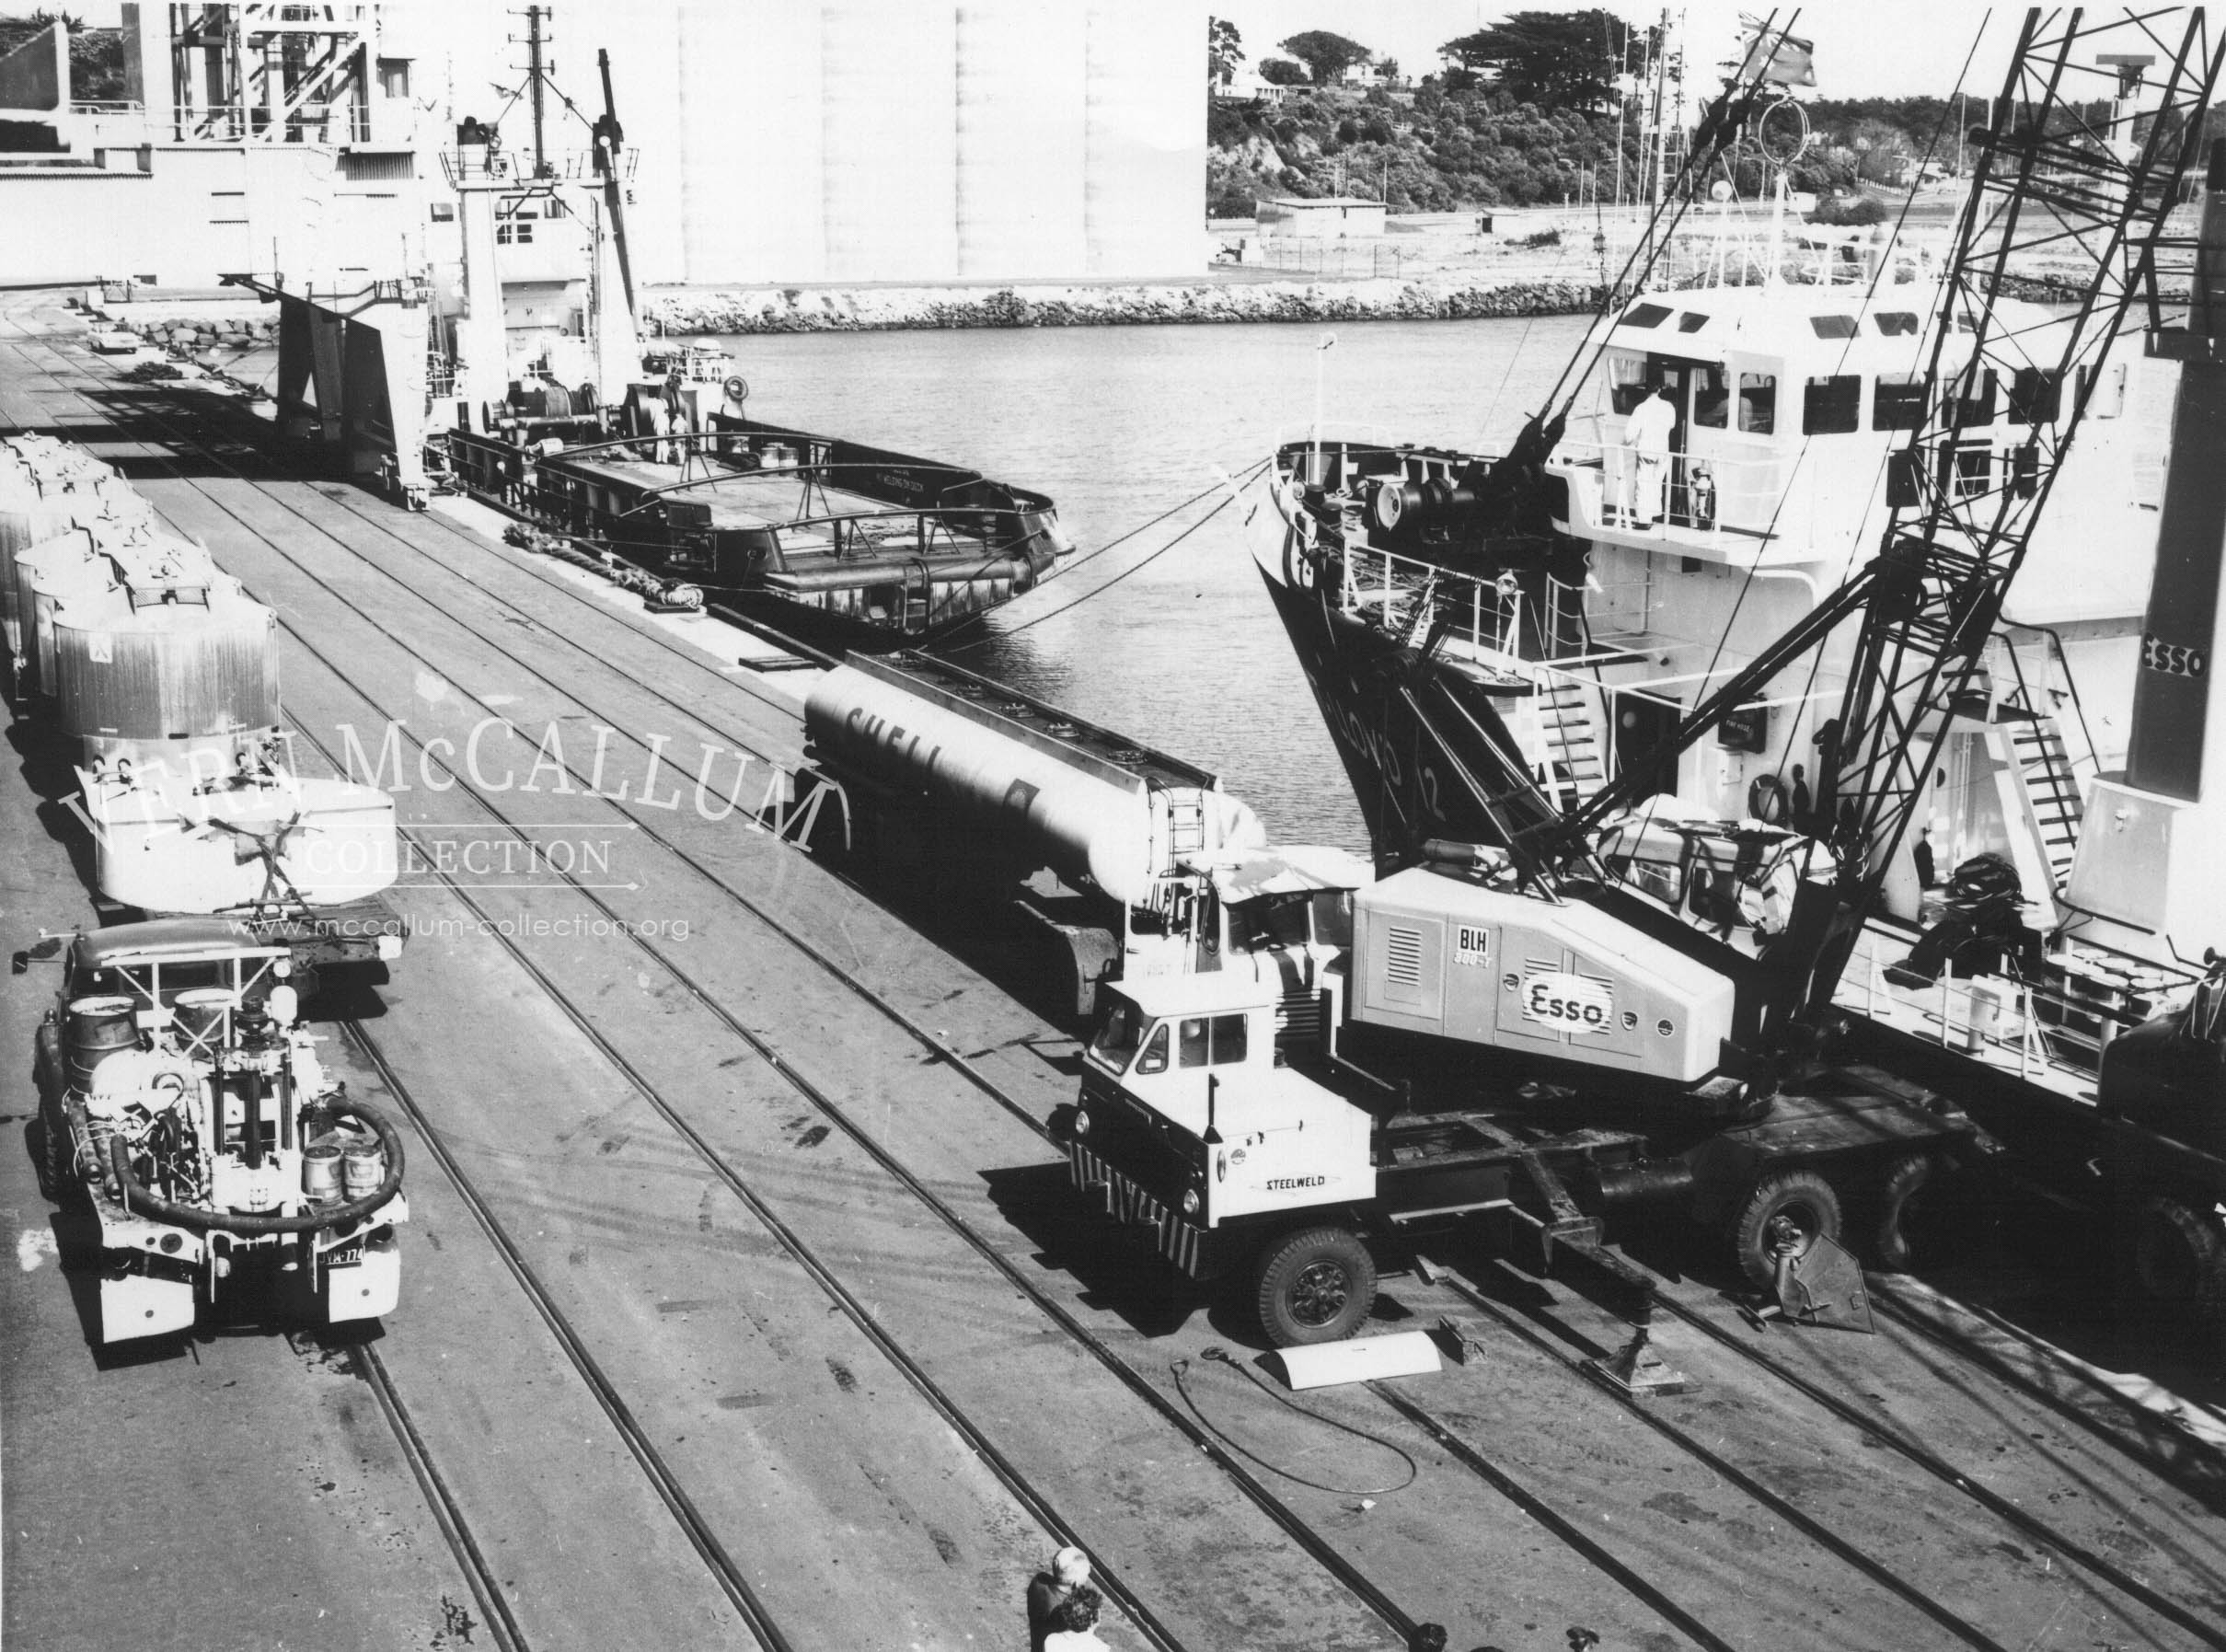 Oil rig tender boats being refuelled and loaded at the K S Anderson wharf.